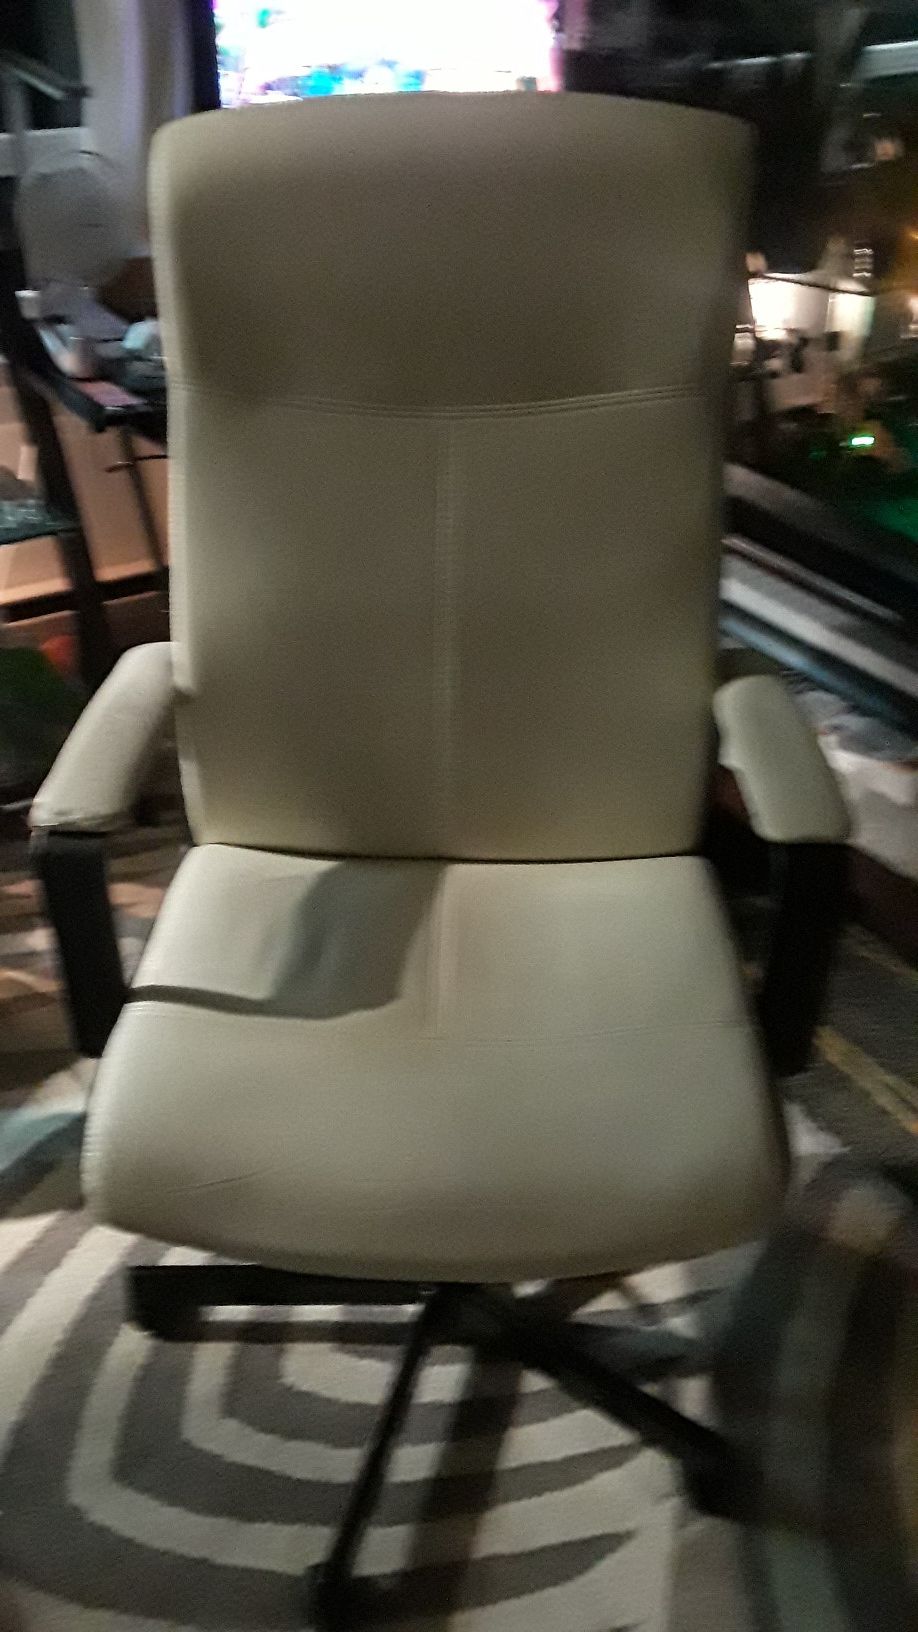 Comfortable beige office chair must pick up downtown Seattle